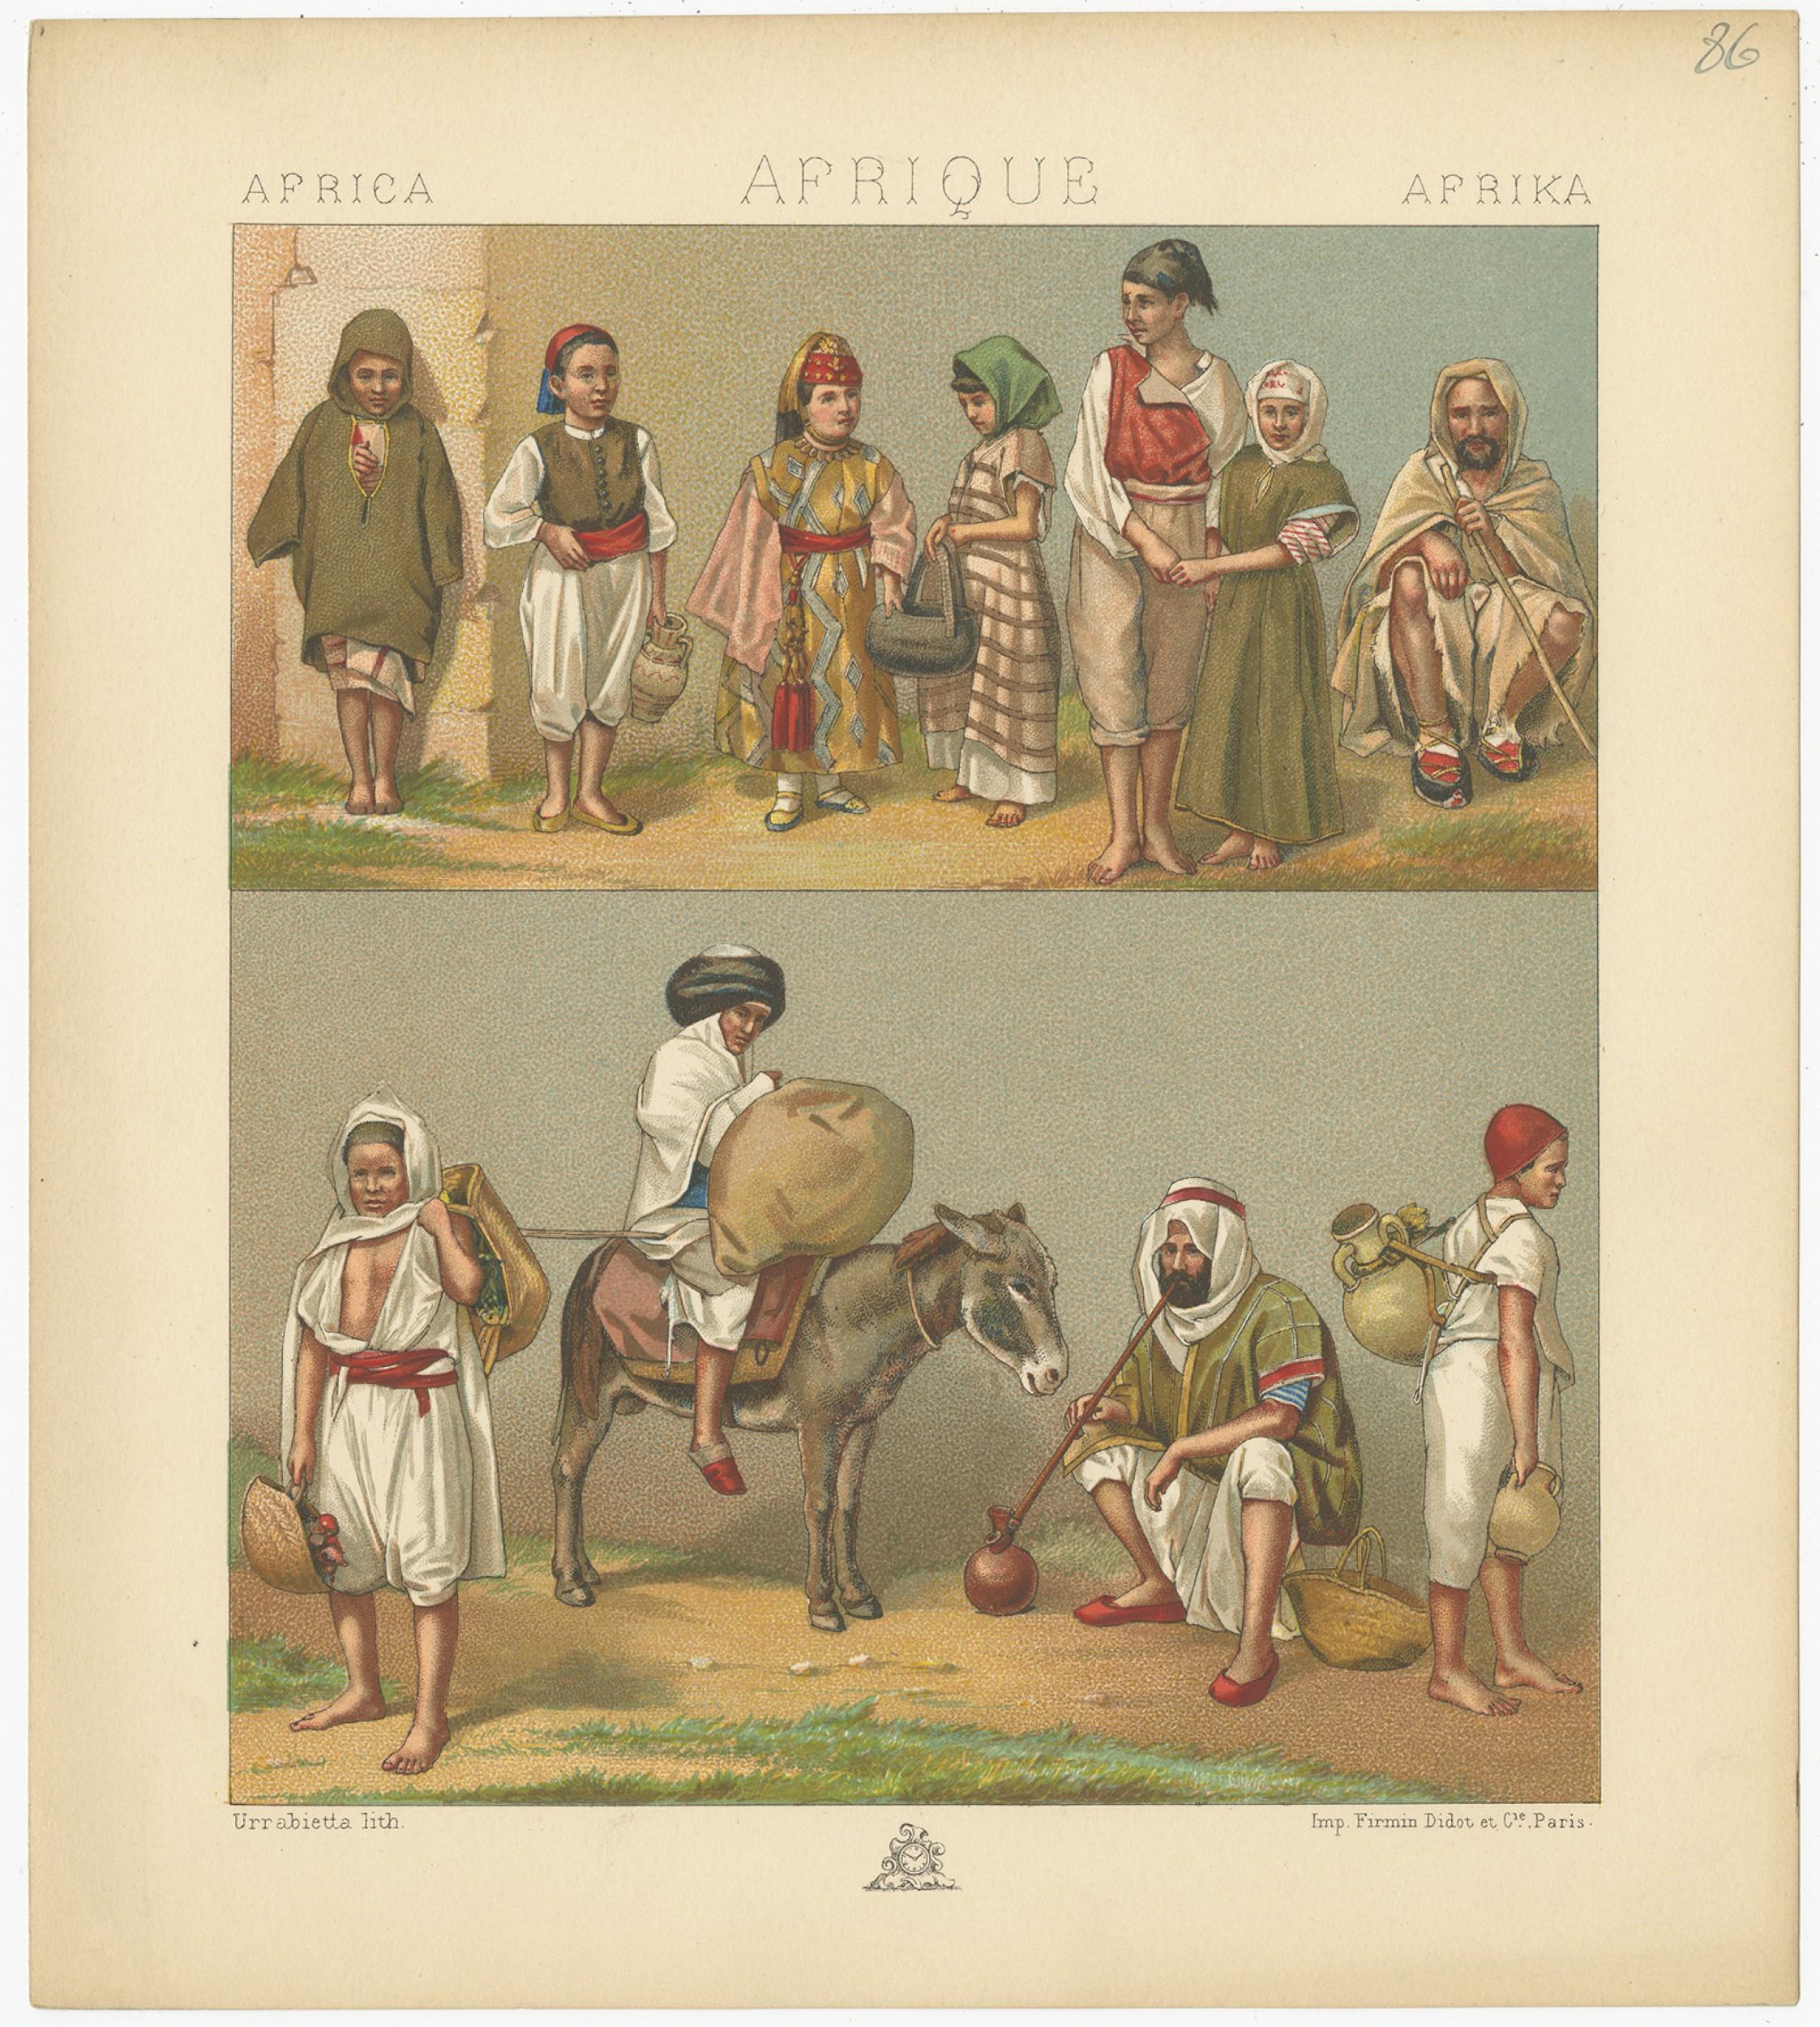 Antique print titled 'Africa - Afrique - Afrika'. Chromolithograph of African Costumes. This print originates from 'Le Costume Historique' by M.A. Racinet. Published, circa 1880.